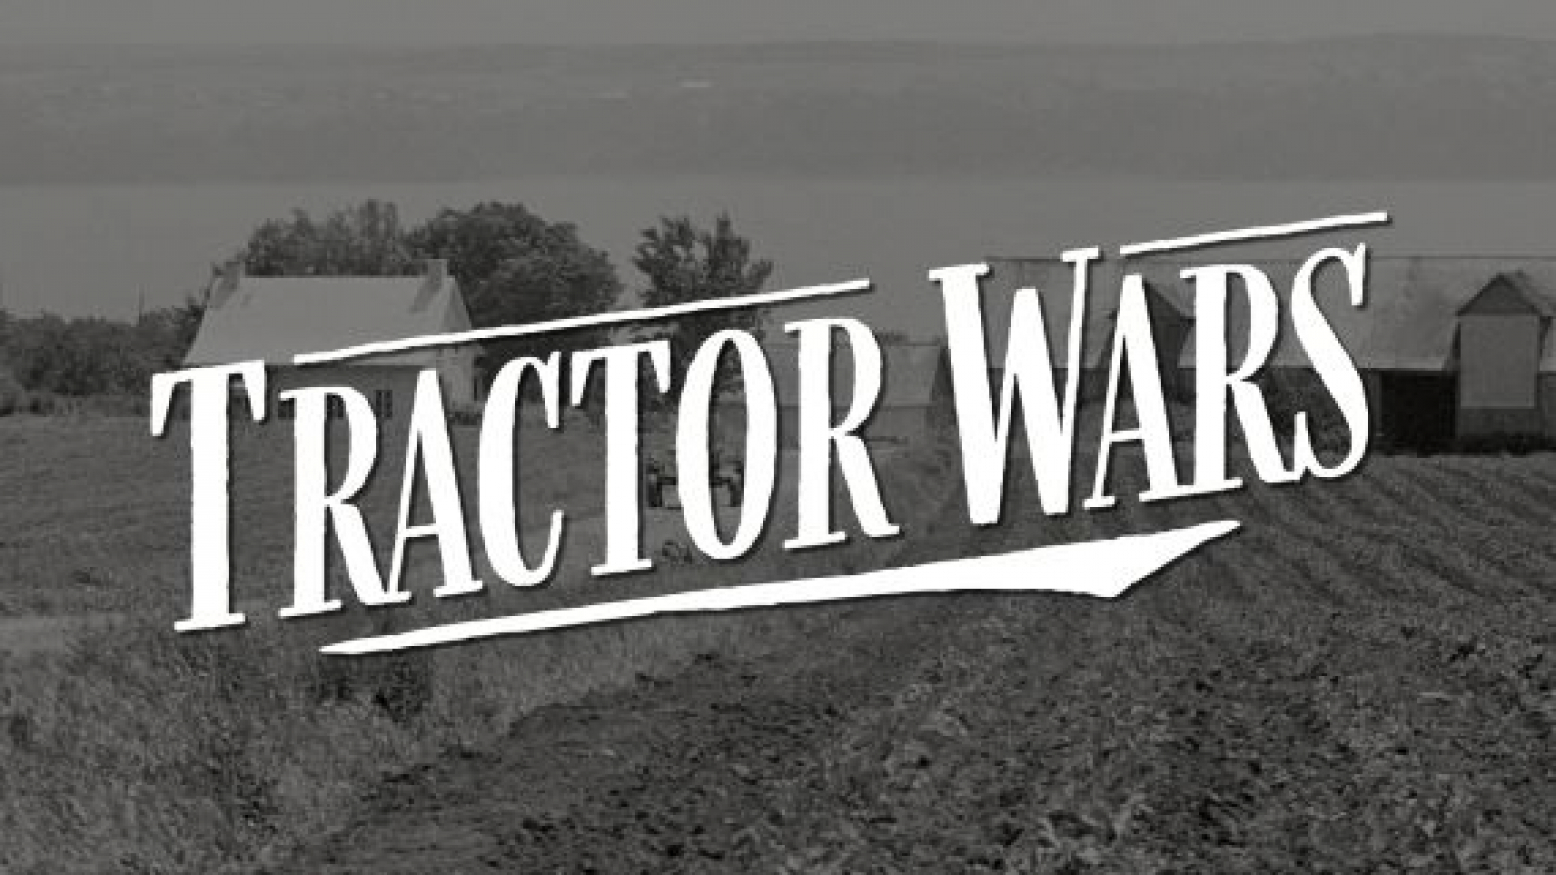 Black and white image of a field with the words "Tractor Wars" 